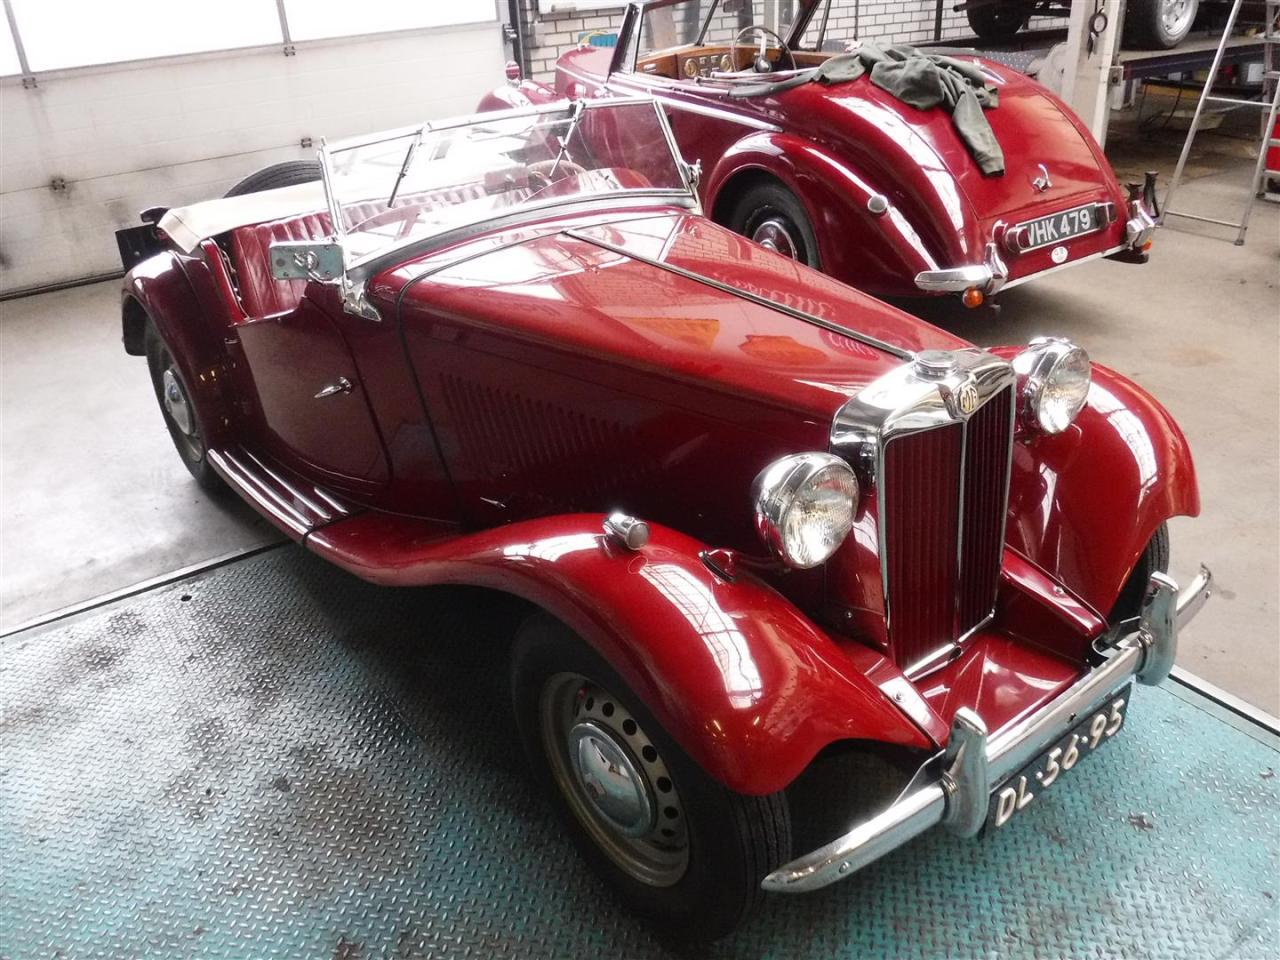 1952 MG TD 1952 red